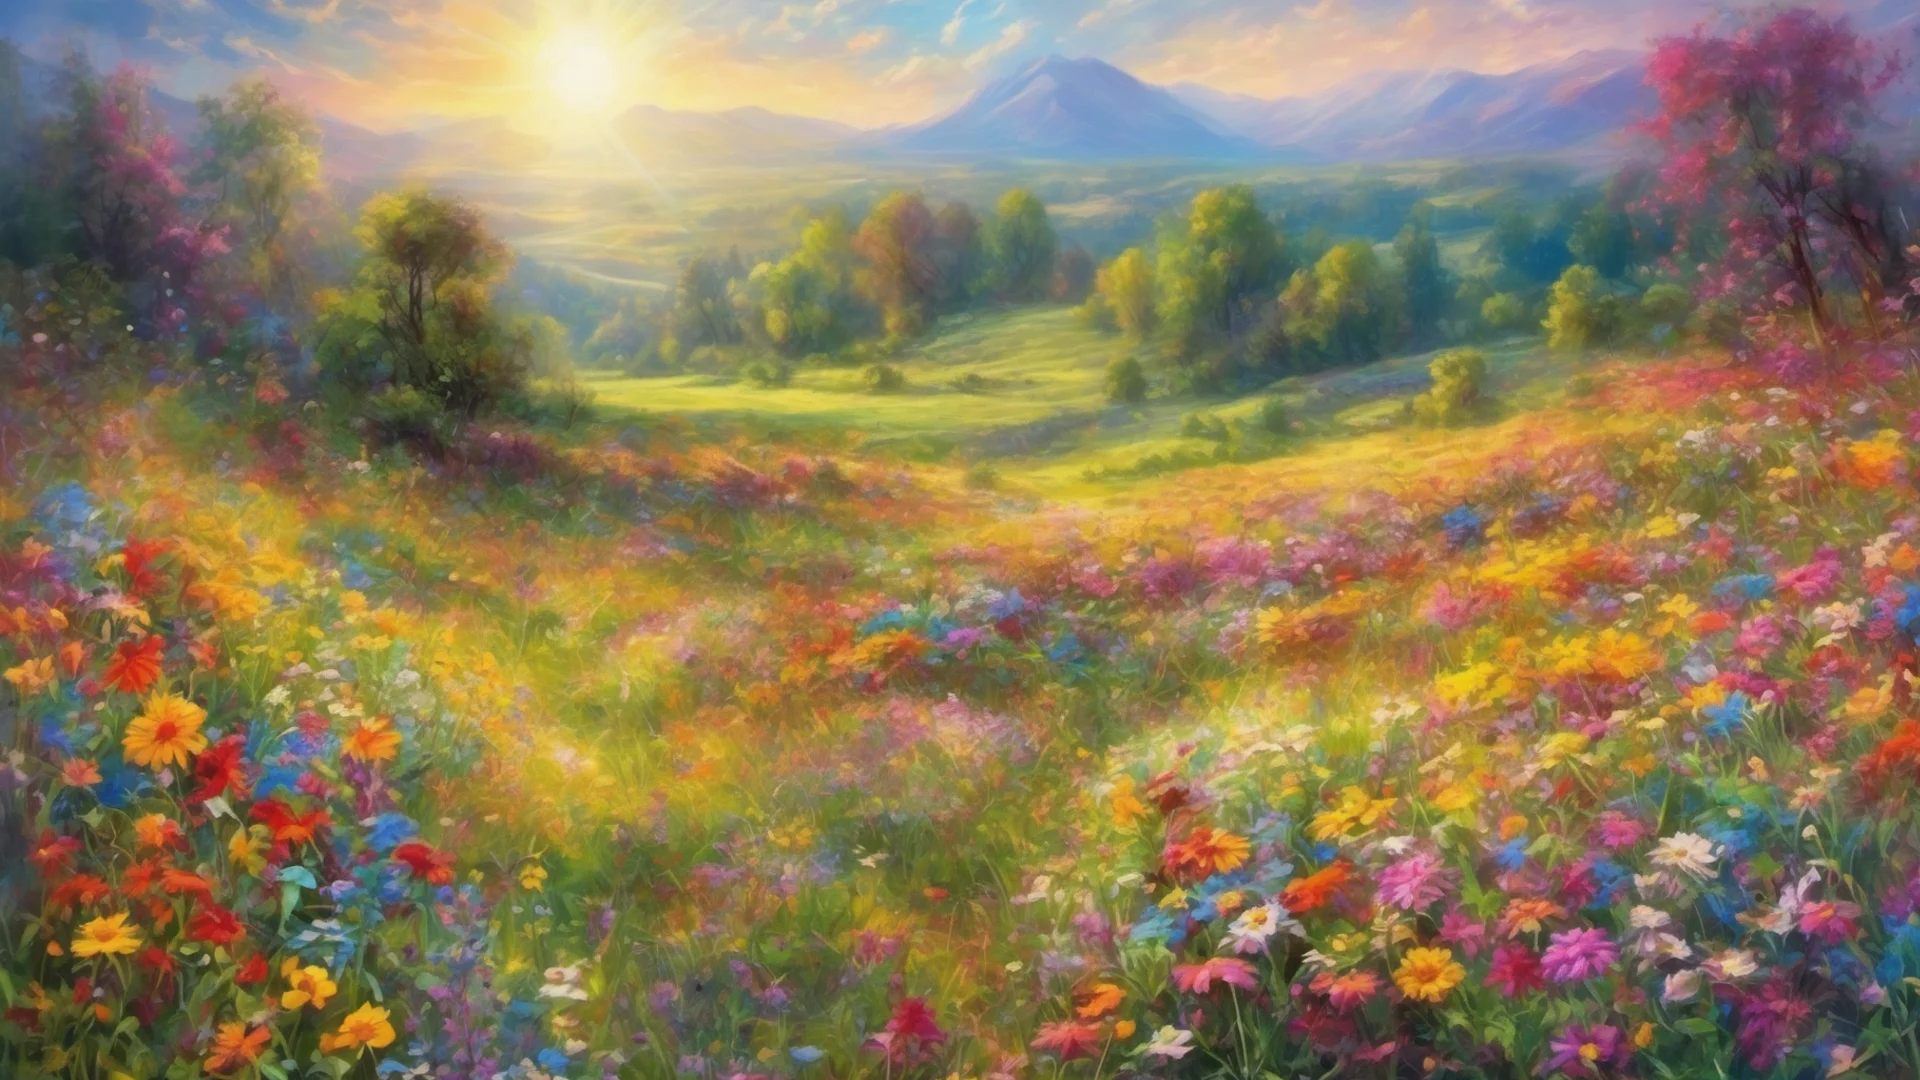 within a lush meadow%2C an enchanting tableau unfolds%2C radiating pure adoration and affection. a vibrant tapestry of wildflowers blankets the ground%2C painting the landscape with a riot of colors